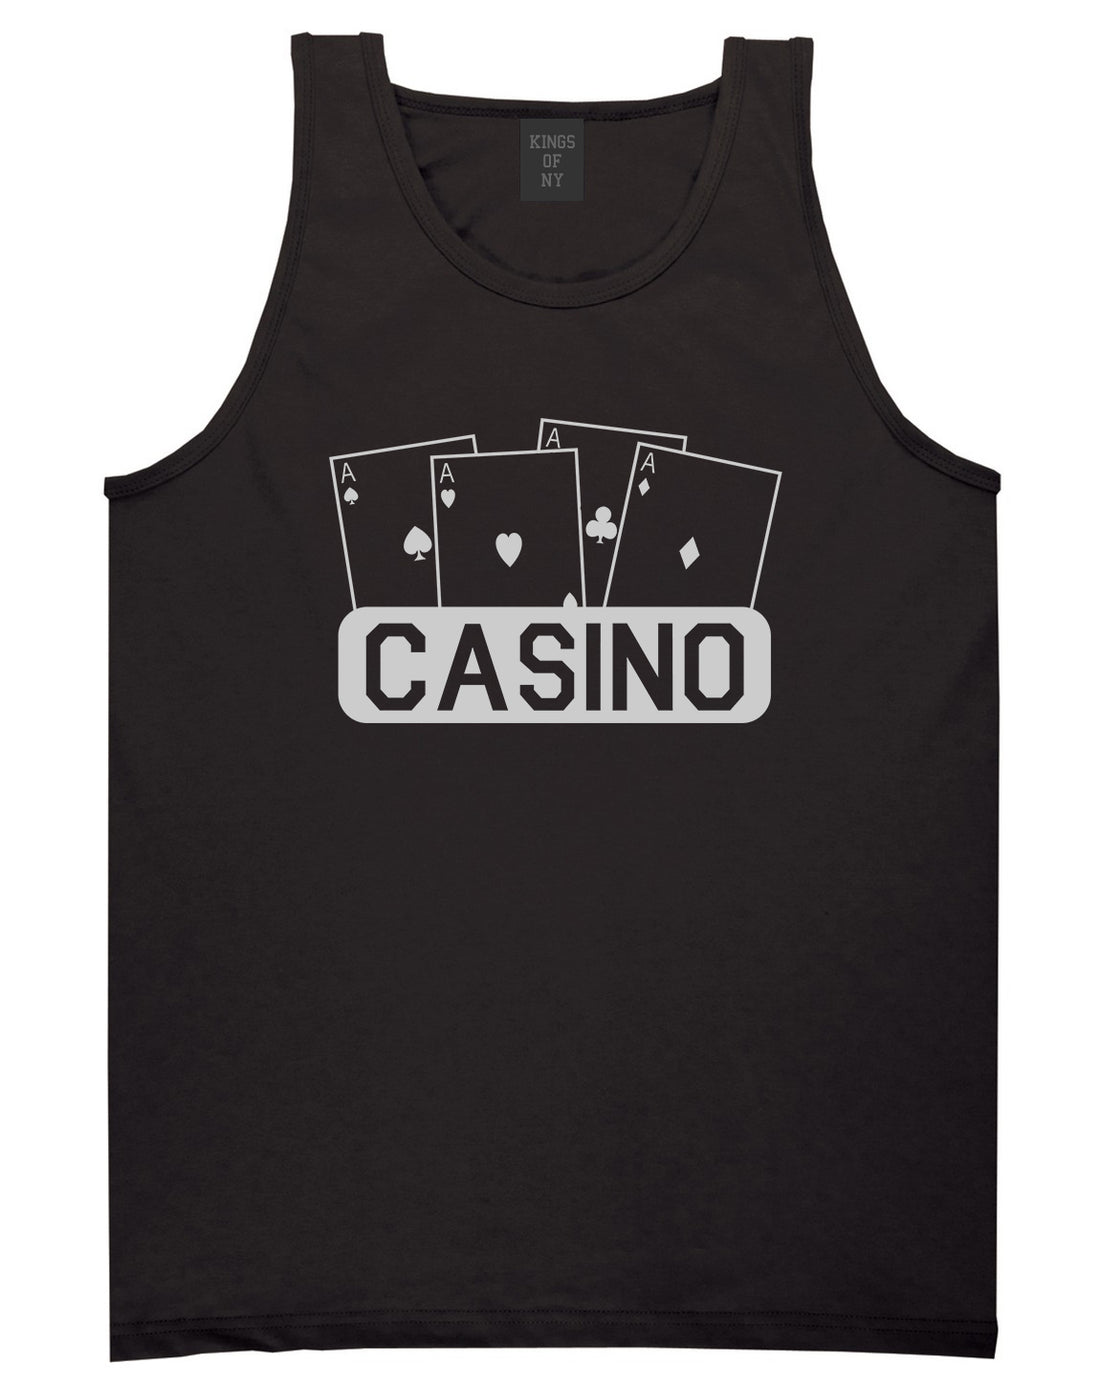 Casino Ace Cards Black Tank Top Shirt by Kings Of NY